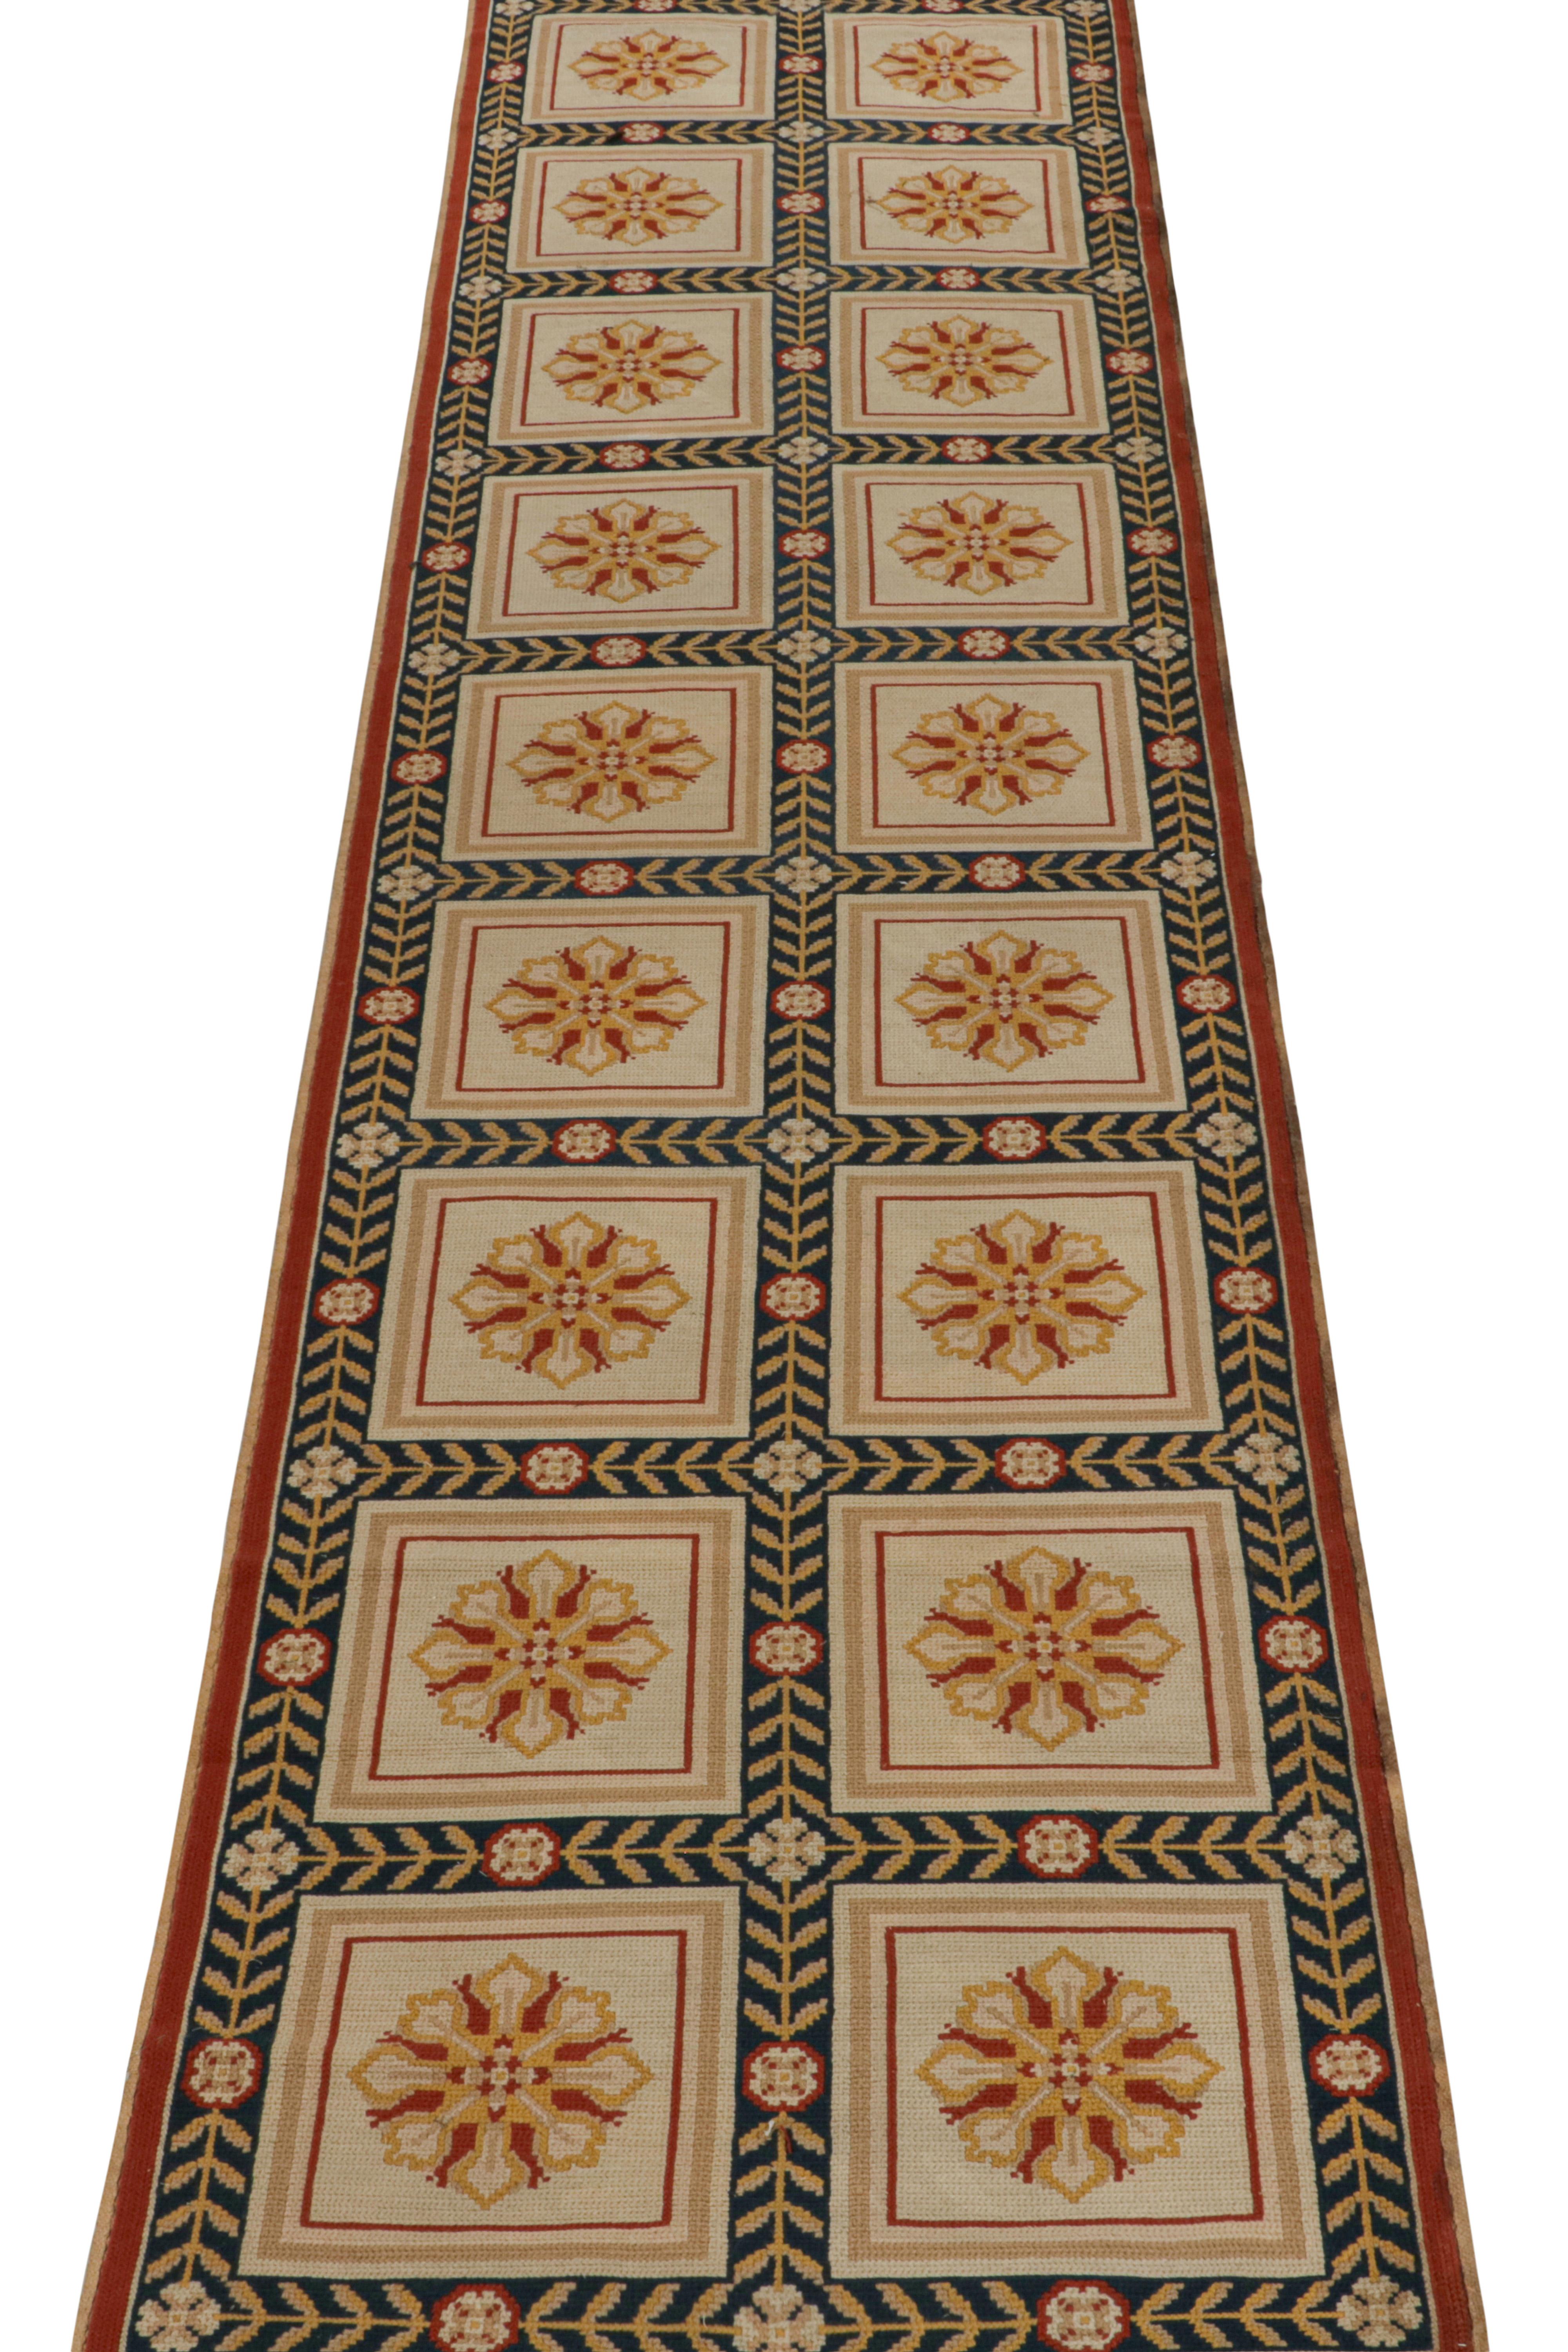 This pair of vintage 3x13 needlepoint runner is the next grand addition to Rug & Kilim’s repertoire of classic curations. Hand-knotted in wool.
Further on the Design: 
These 3x13 pieces are mid-century Portuguese runners from the famed Arraiolos